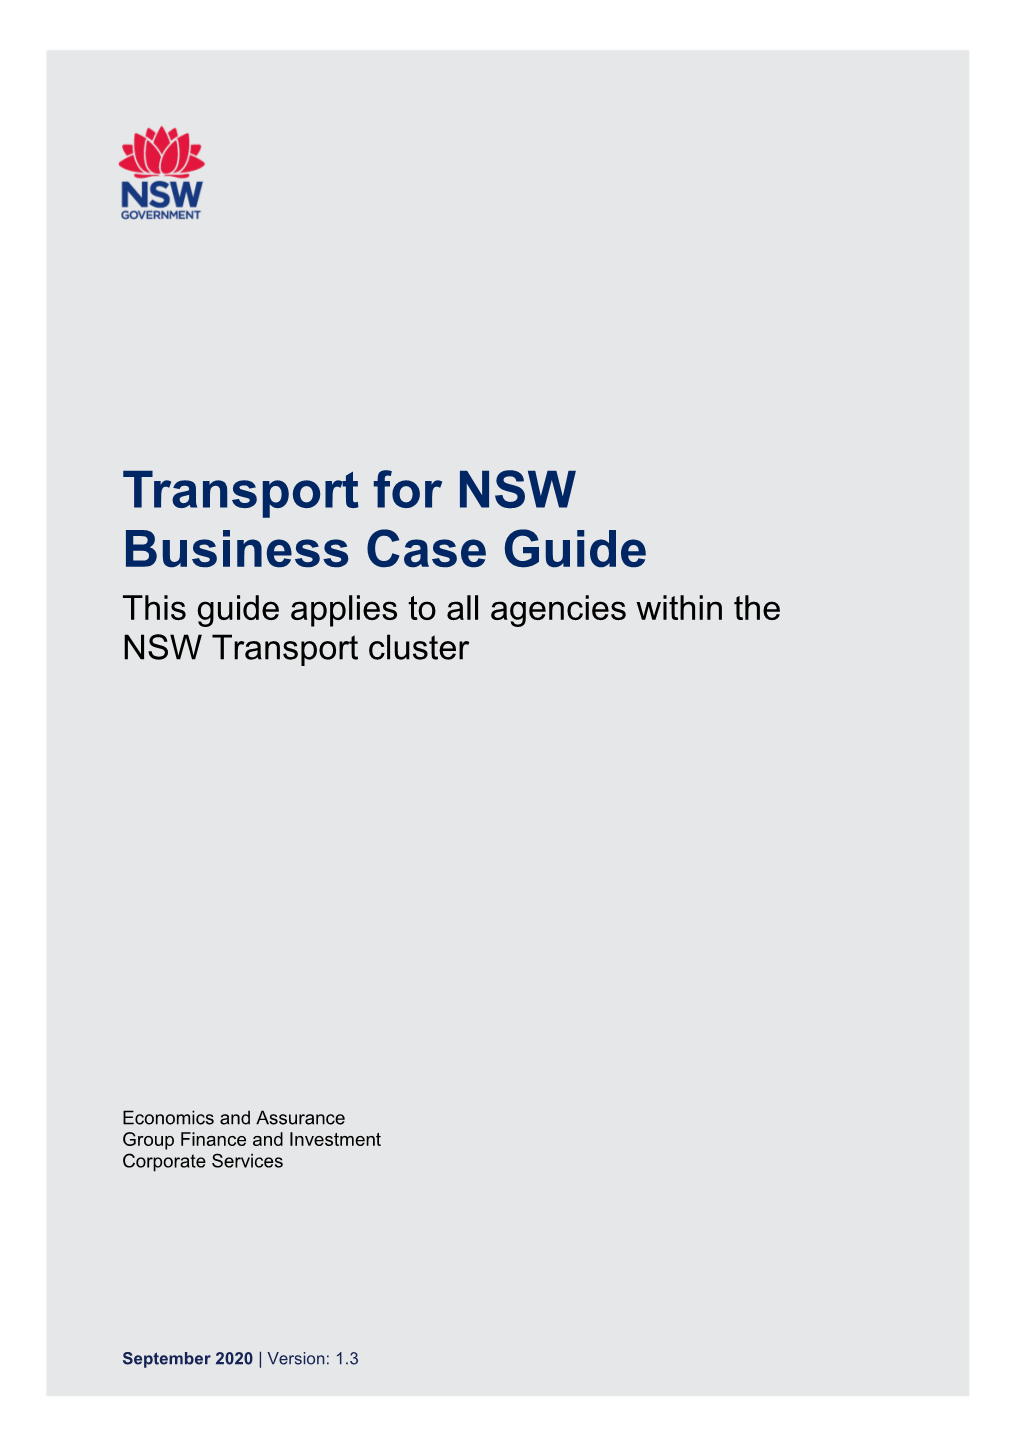 Transport for NSW Business Case Guide This Guide Applies to All Agencies Within the NSW Transport Cluster